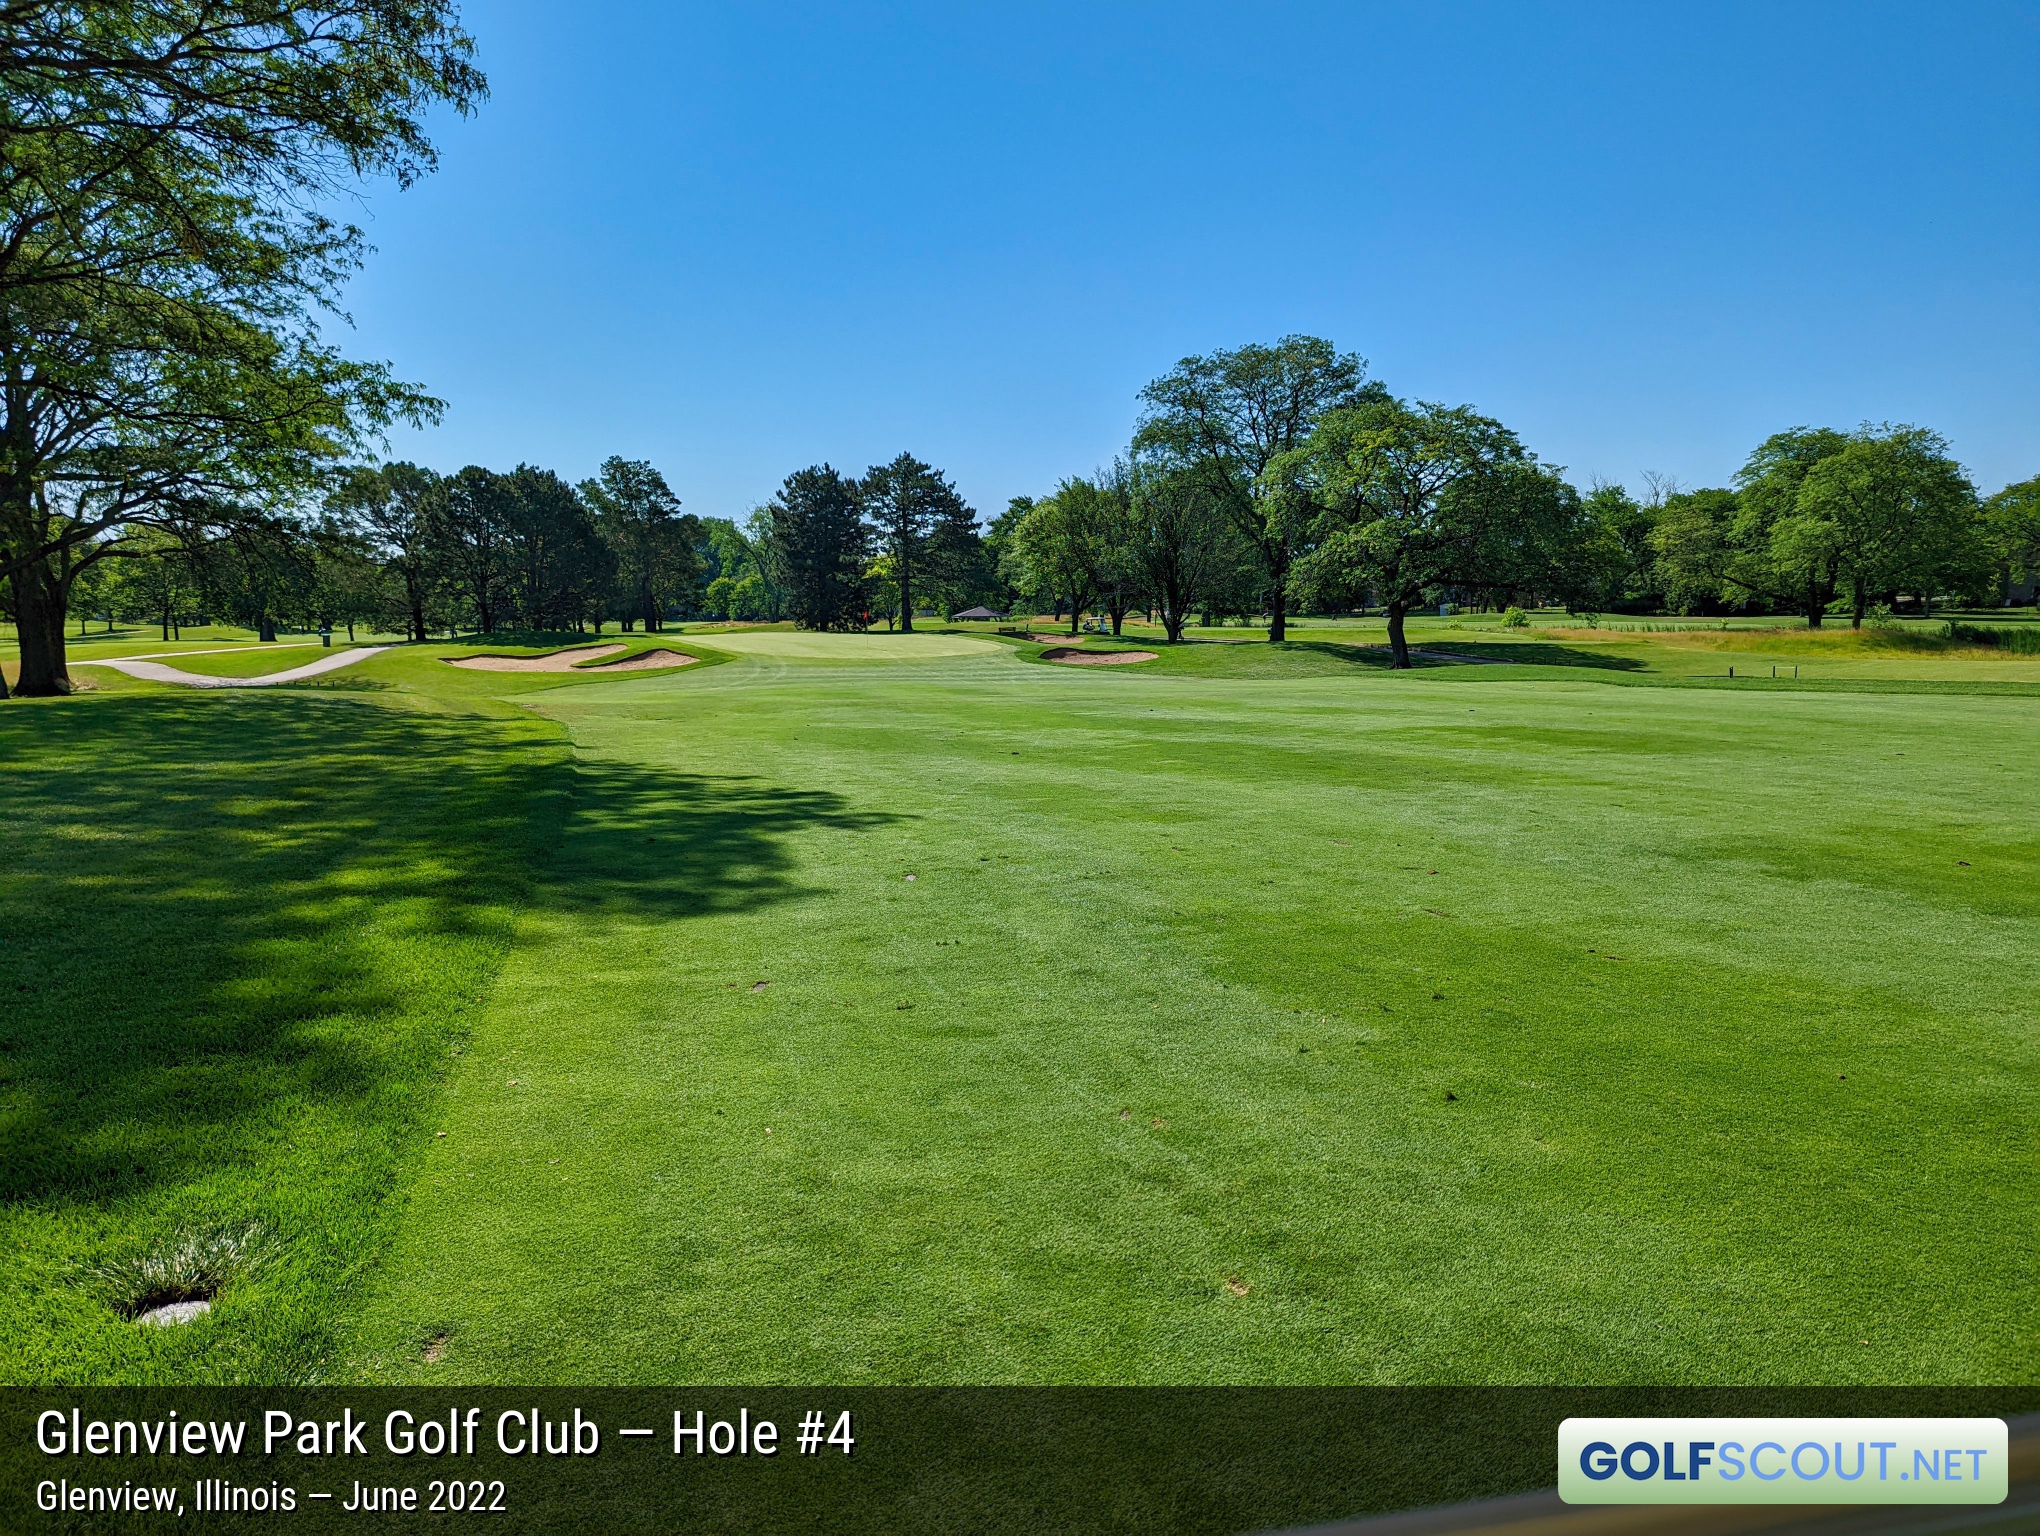 Photo of hole #4 at Glenview Park Golf Club in Glenview, Illinois. 